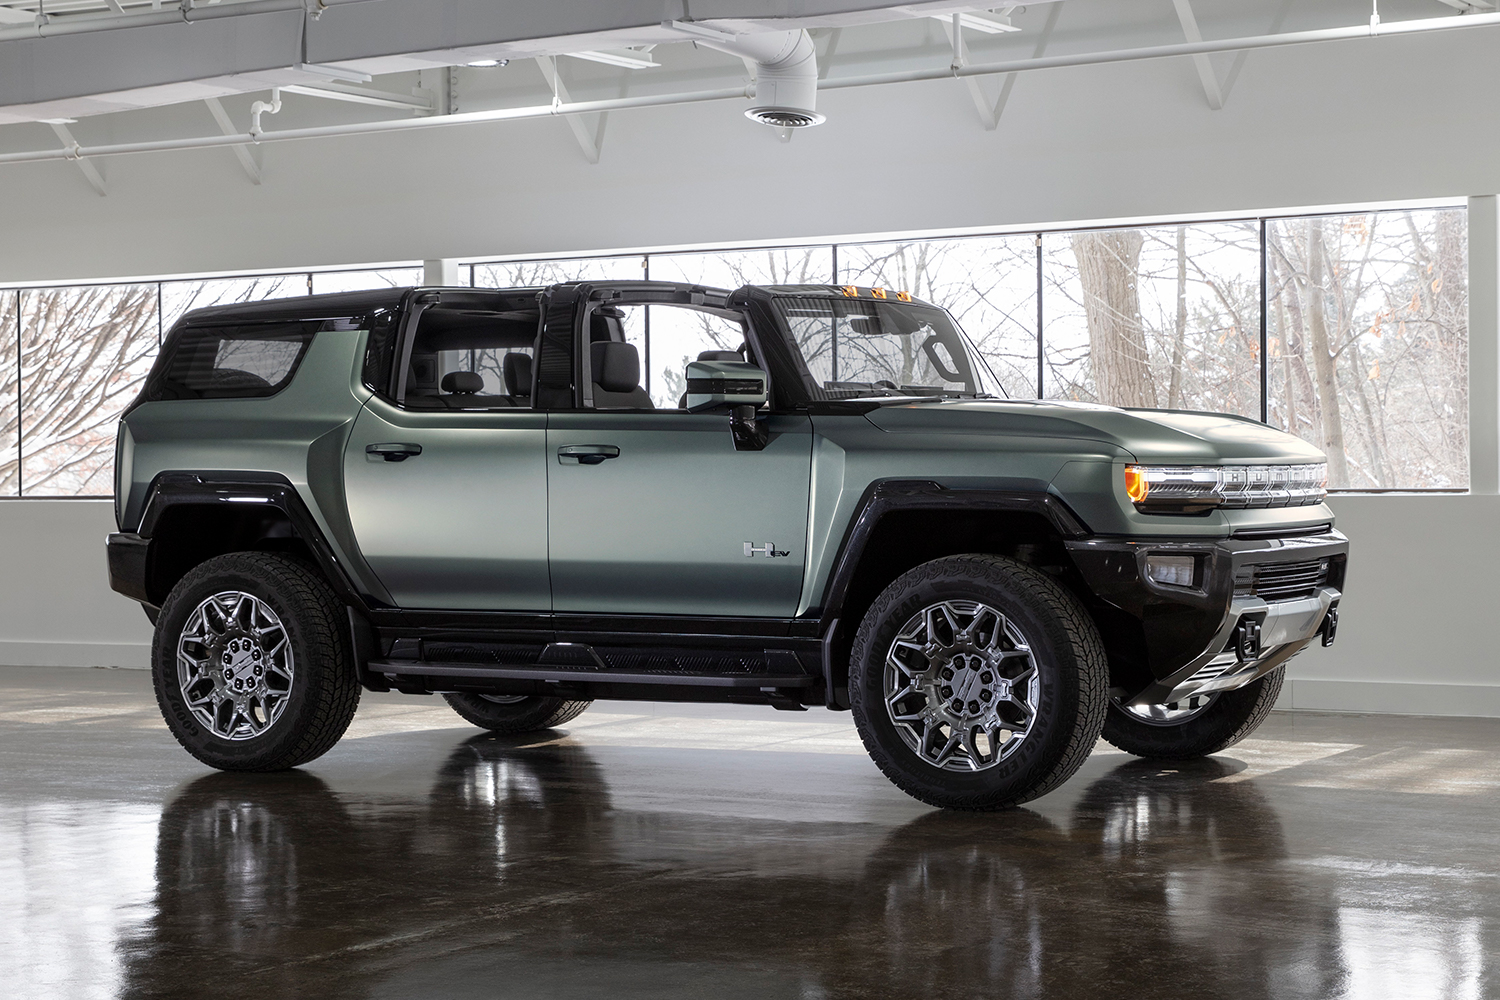 A green electric Hummer SUV from GMC sitting in an empty showroom